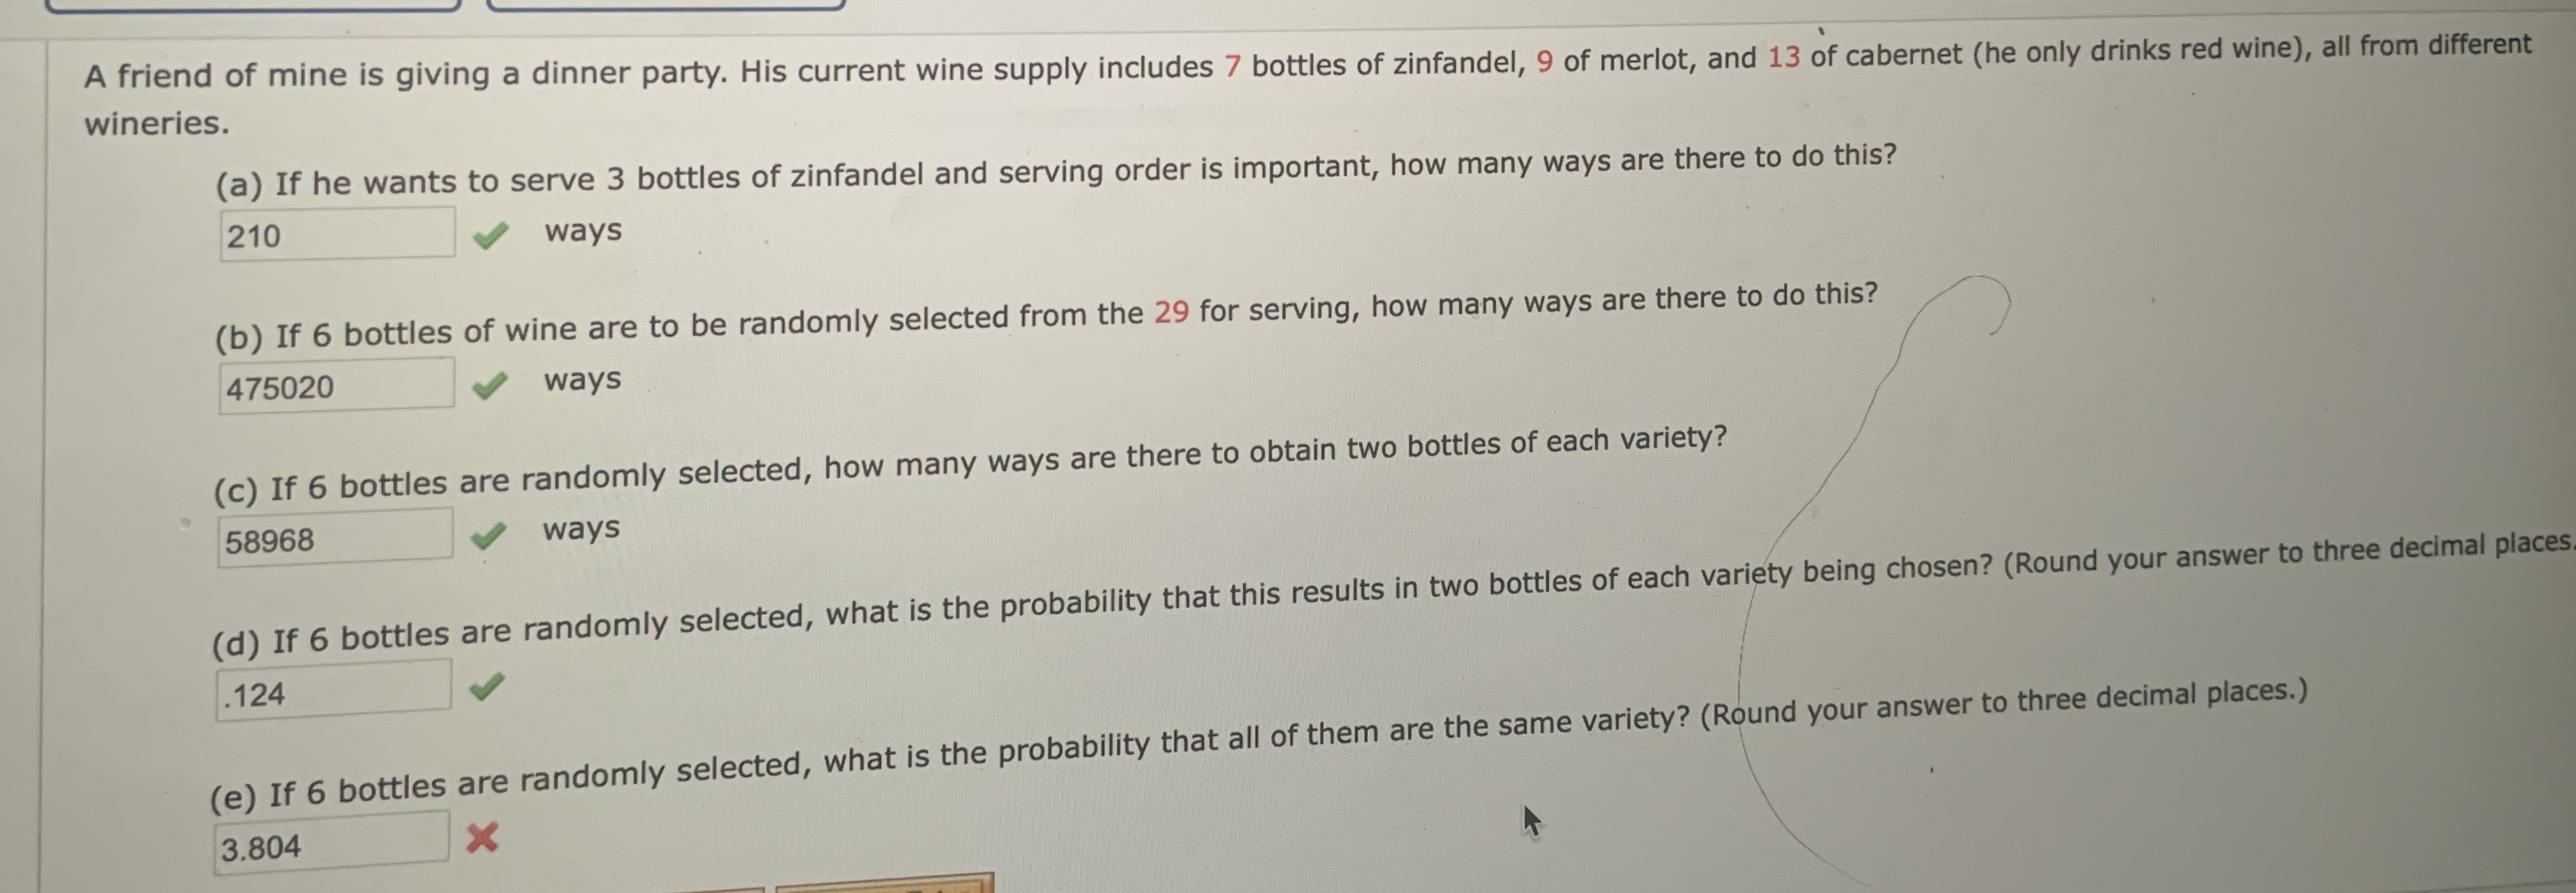 A friend of mine is giving a dinner party. His current wine supply includes 7 bottles of zinfandel, 9 of merlot, and 13 of cabernet (he only drinks red wine), all from different
wineries.
(a) If he wants to serve 3 bottles of zinfandel and serving order is important, how many ways are there to do this?
210
ways
(b) If 6 bottles of wine are to be randomly selected from the 29 for serving, how many ways are there to do this?
475020
ways
(c) If 6 bottles are randomly selected, how many ways are there to obtain two bottles of each variety?
58968
ways
(d) If 6 bottles are randomly selected, what is the probability that this results in two bottles of each variety being chosen? (Round your answer to three decimal places.
.124
(e) If 6 bottles are randomly selected, what is the probability that all of them are the same variety? (Round your answer to three decimal places.)
3.804
